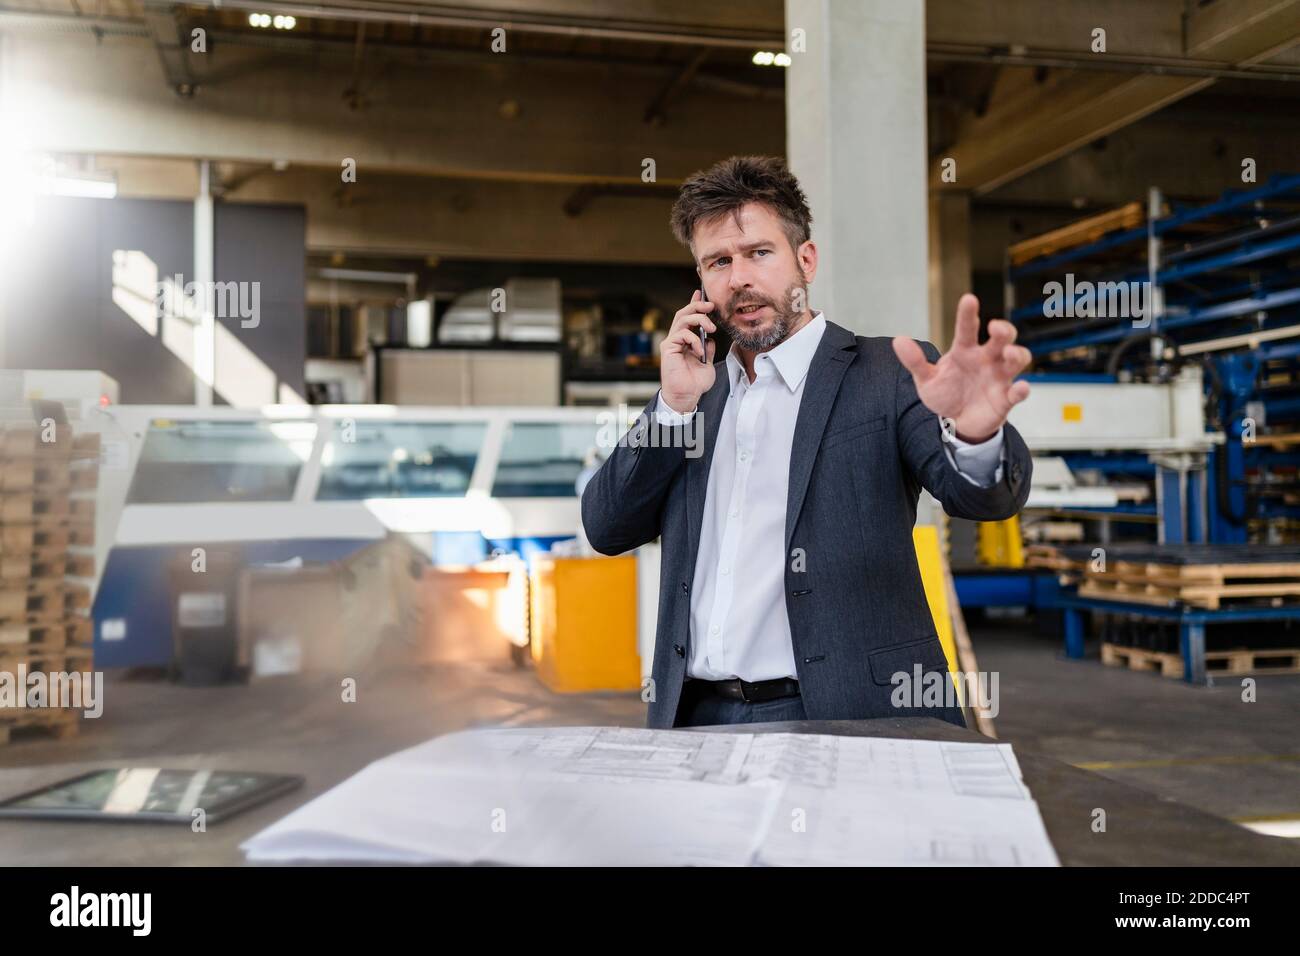 Mature businessman discussing on mobile phone while working at factory Stock Photo